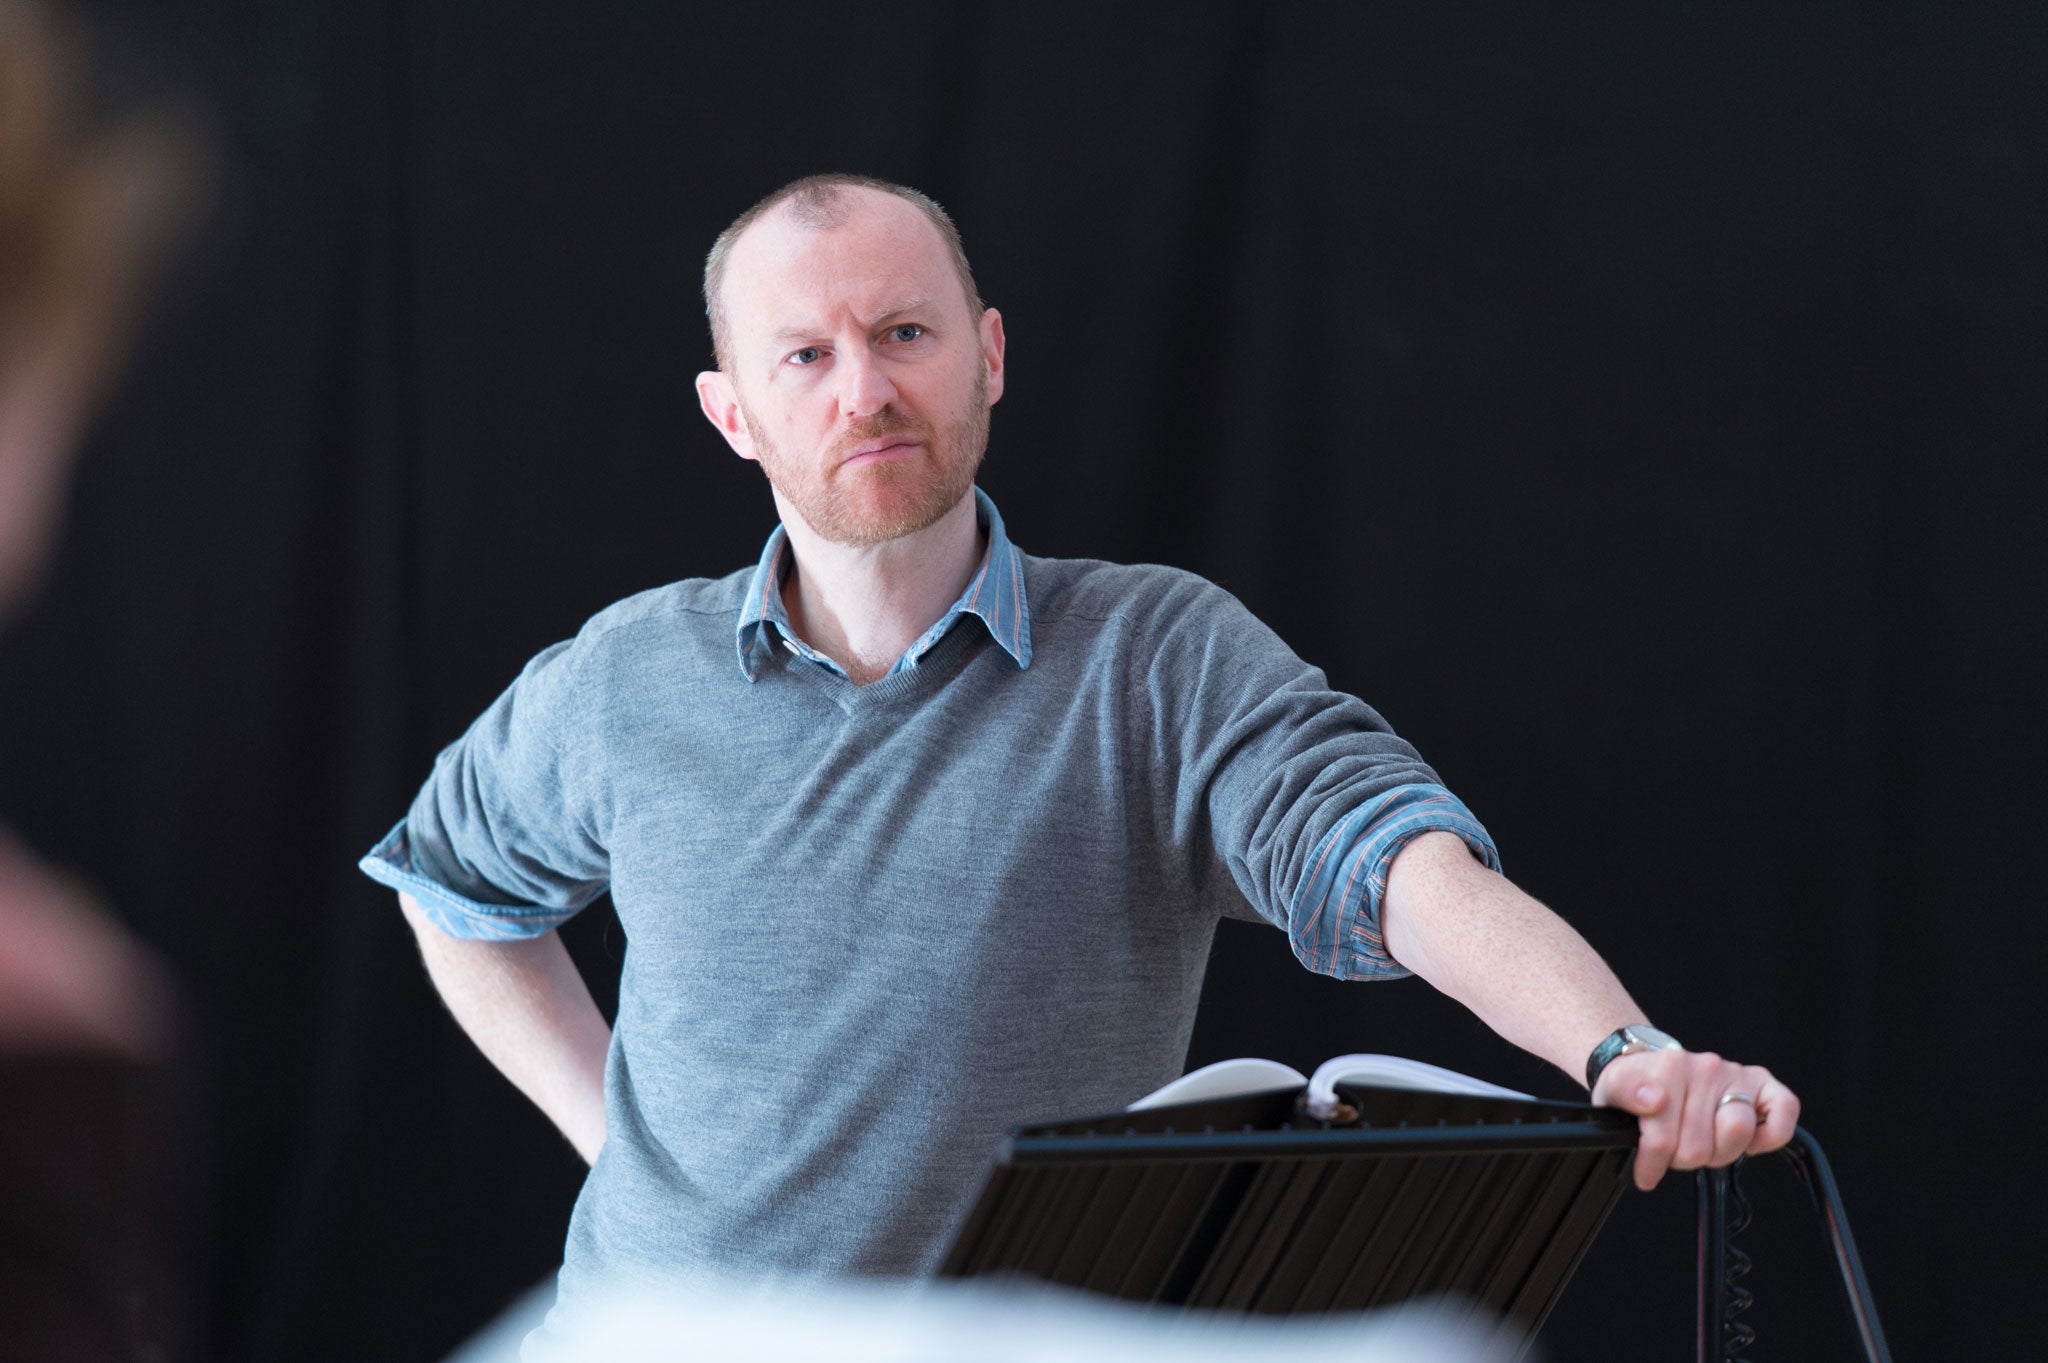 Gatiss is stepping into his first Shakespeare role in Coriolanus this week